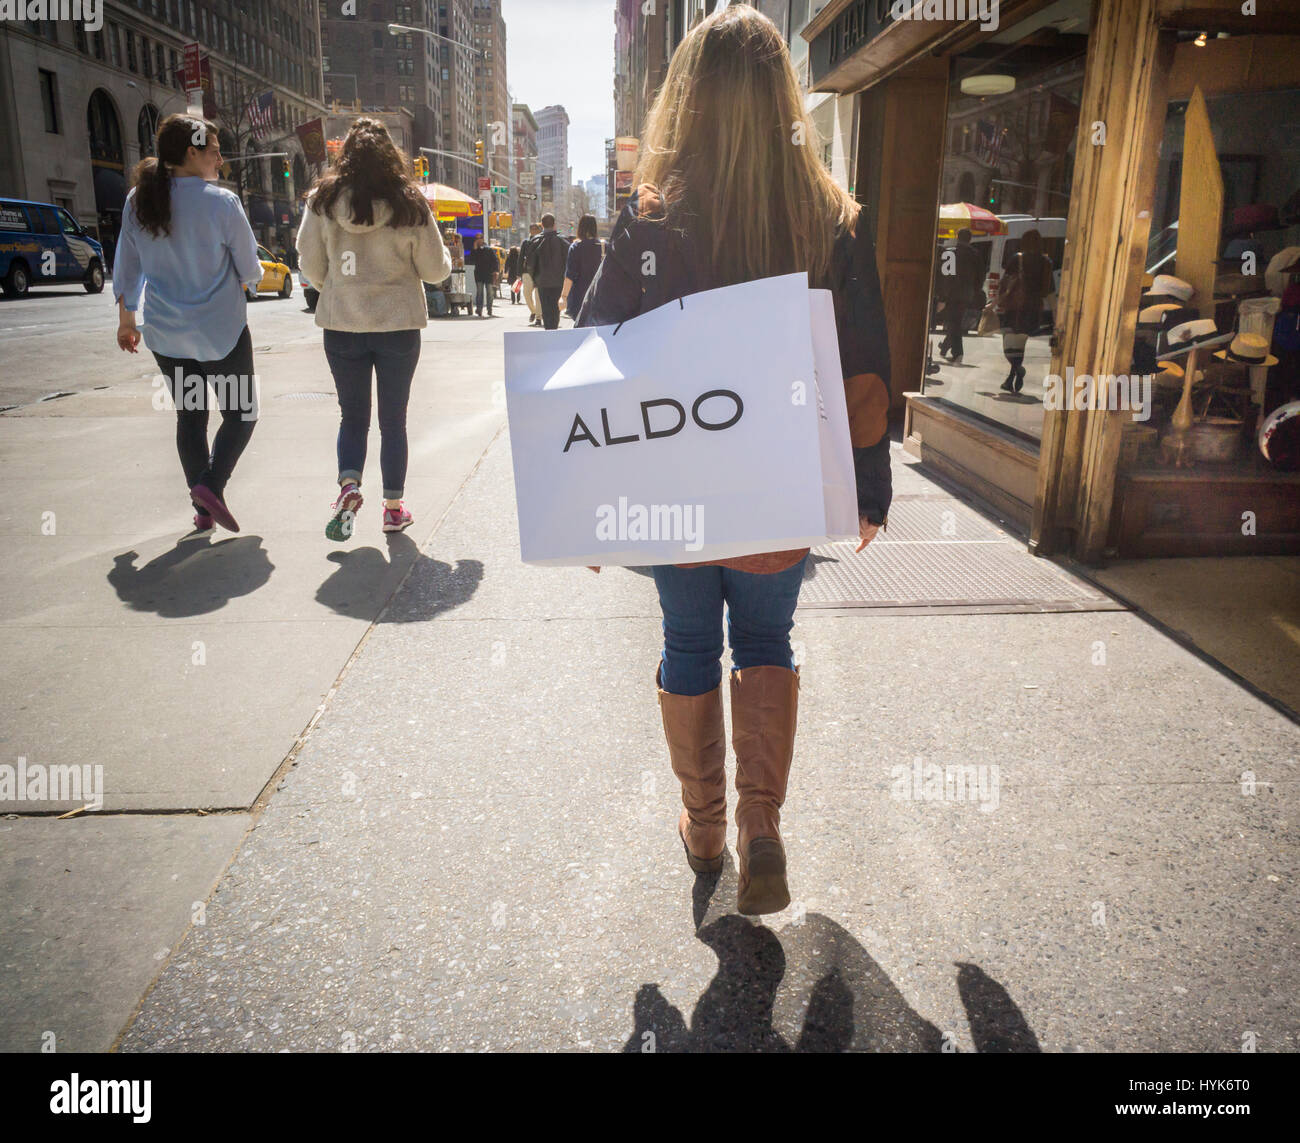 A shopper walks with a shopping bag containing her purchase from an Aldo store in New York on Monday, April 3, 2017. Aldo, a Canadian company, operates chain of almost 2,150